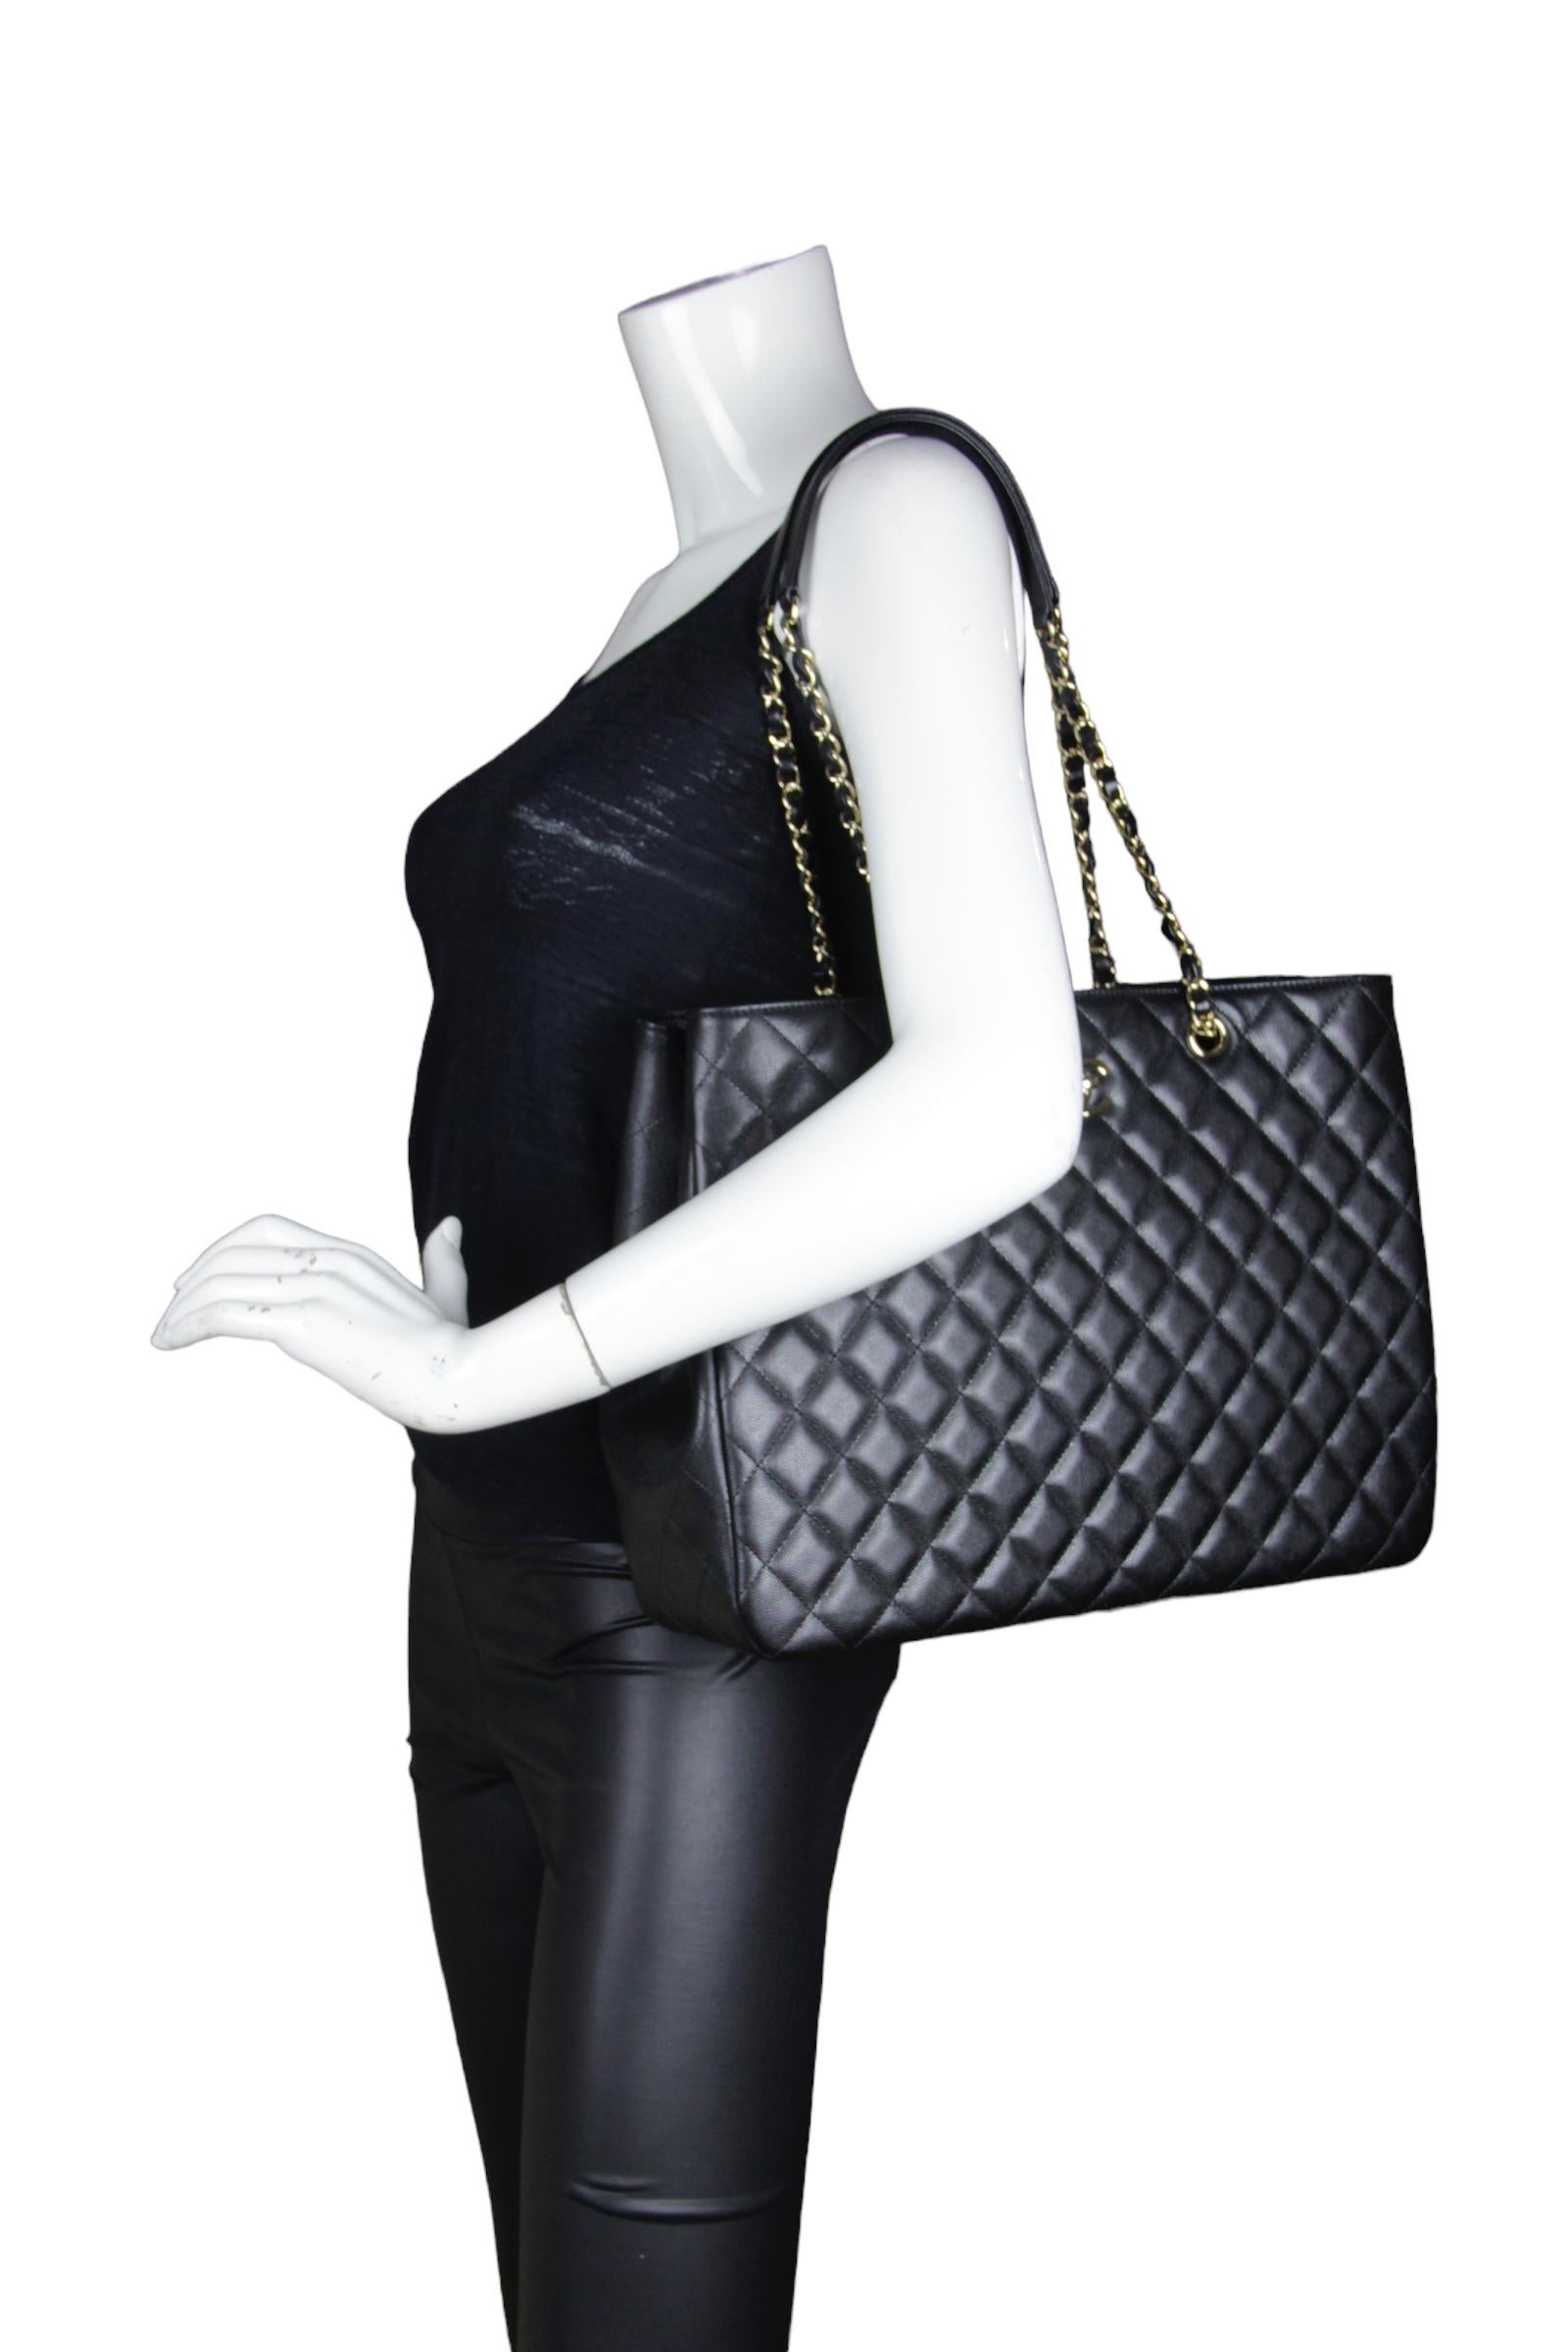 Chanel Black Caviar Quilted Large Classic Shopping Tote Bag 

Made In: Italy
Year of Production: 2022
Color: Black
Hardware: Pale goldtone
Materials: Caviar leather
Lining: Black leather
Closure/Opening: Open top with center twist-lock